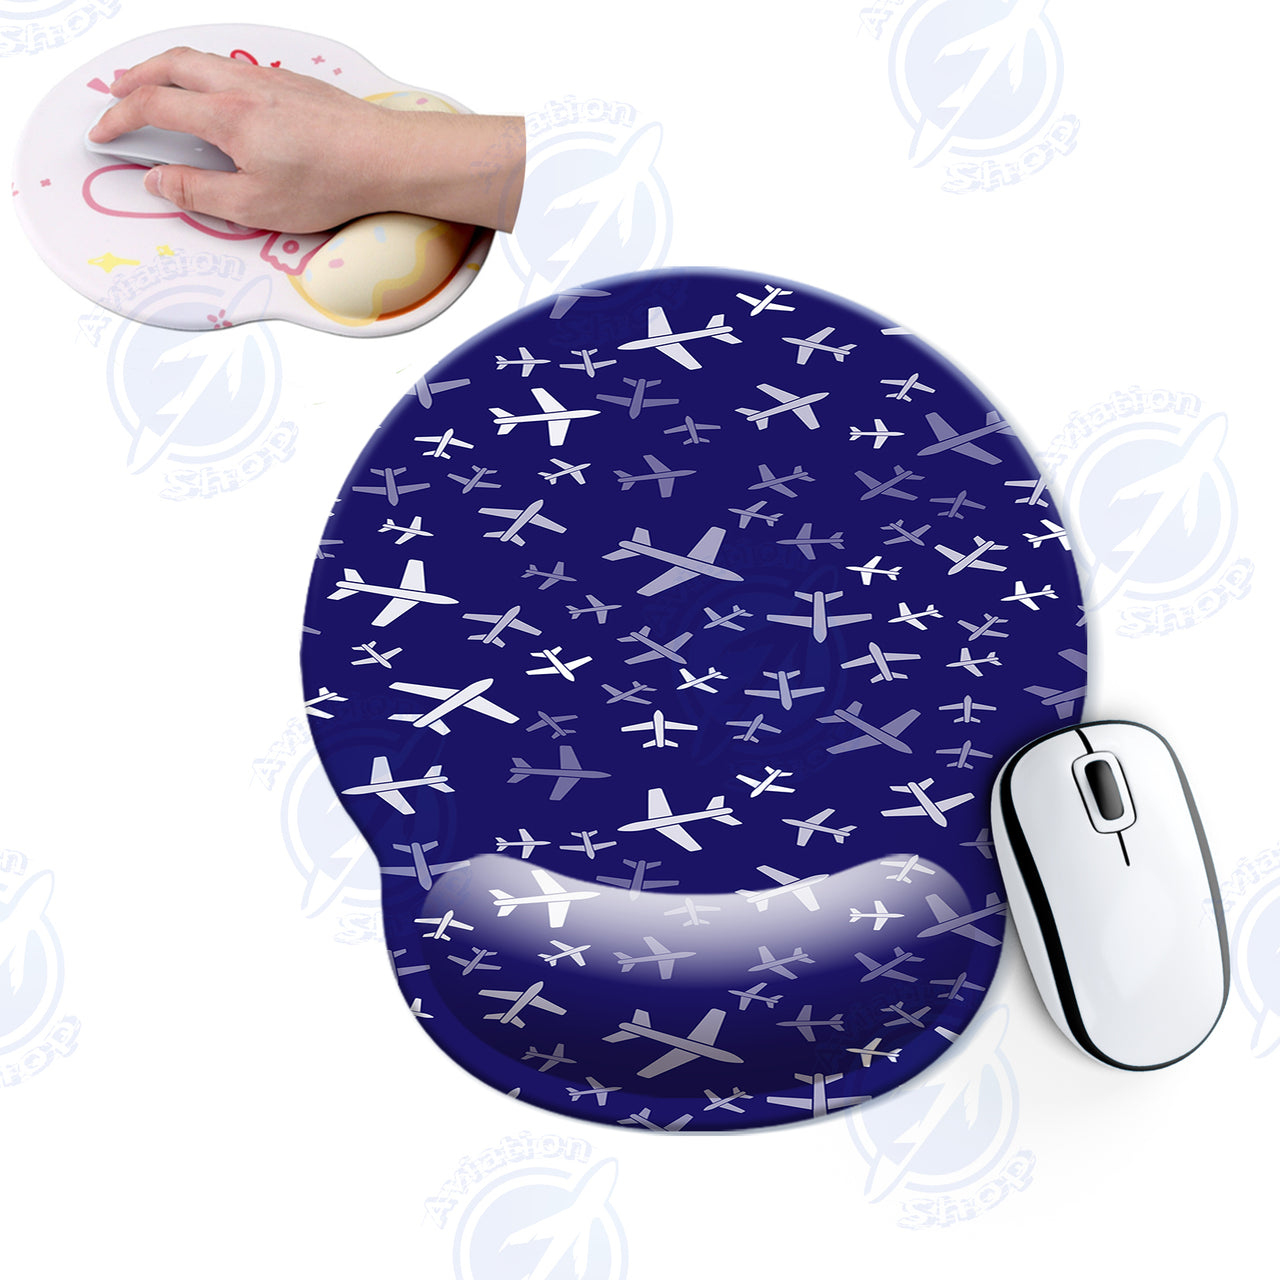 Different Sizes Seamless Airplanes Designed Ergonomic Mouse Pads